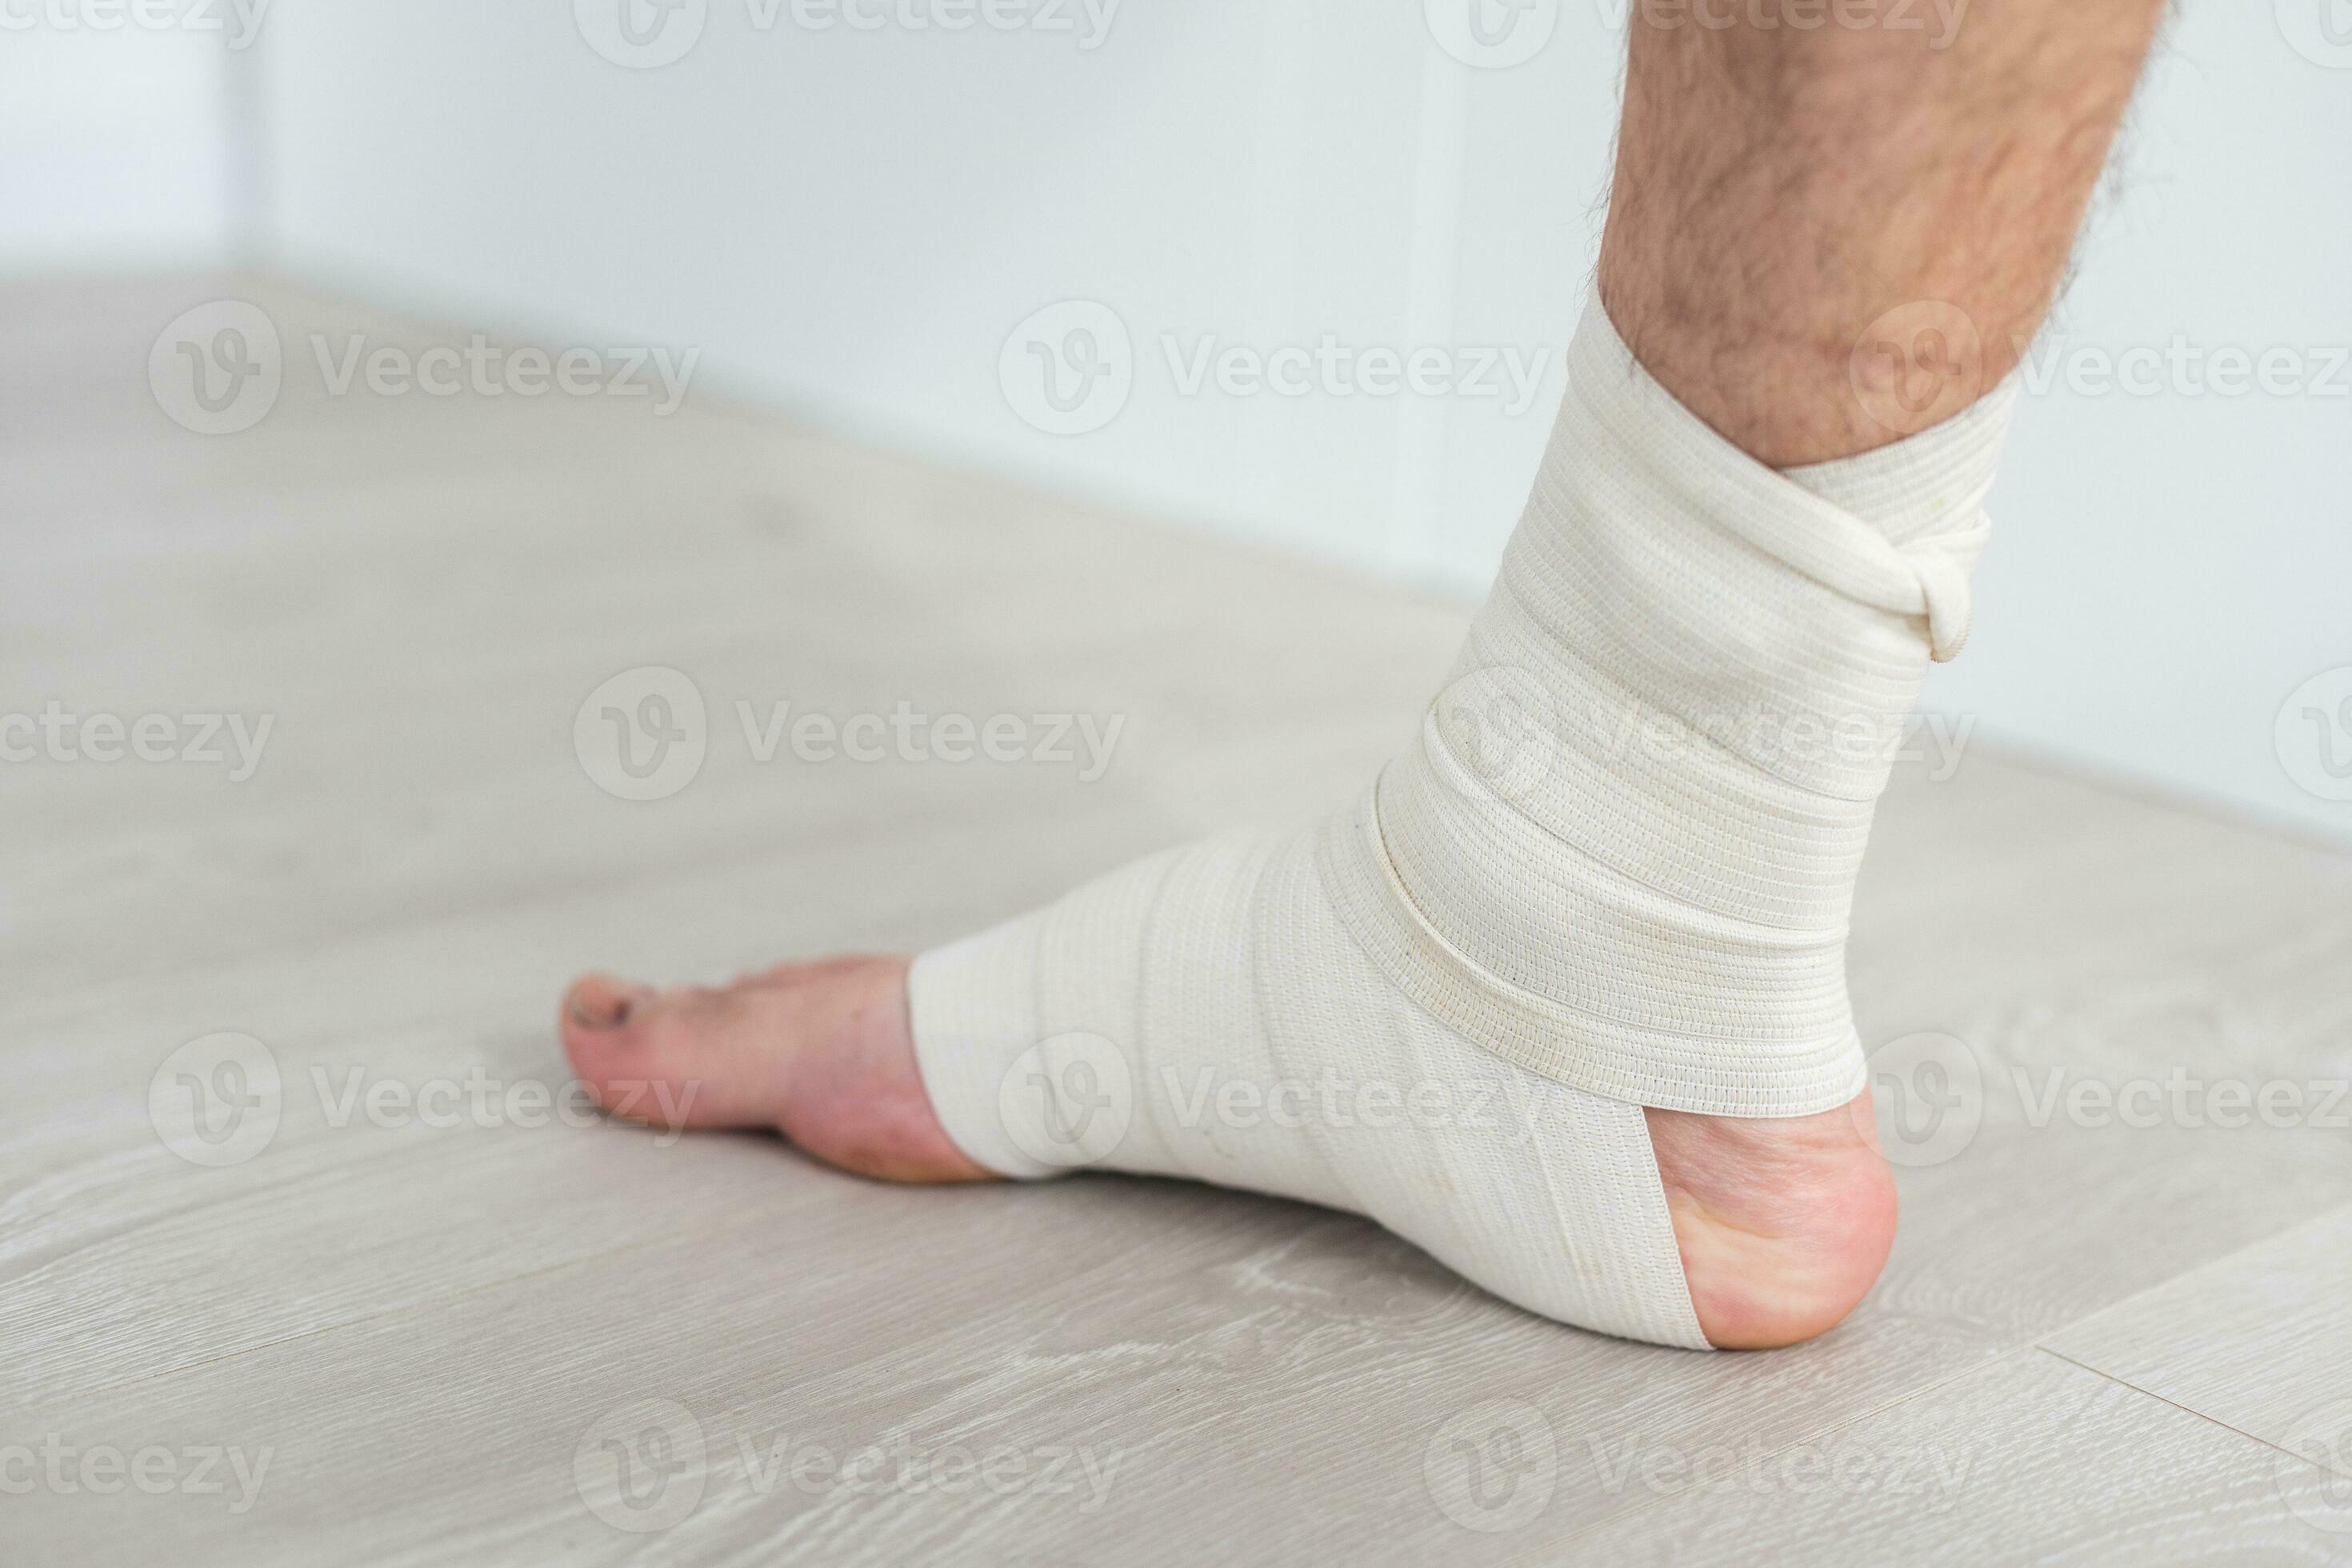 https://static.vecteezy.com/system/resources/previews/035/202/489/large_2x/man-using-put-on-elastic-bandage-with-legs-having-leg-pain-photo.jpg